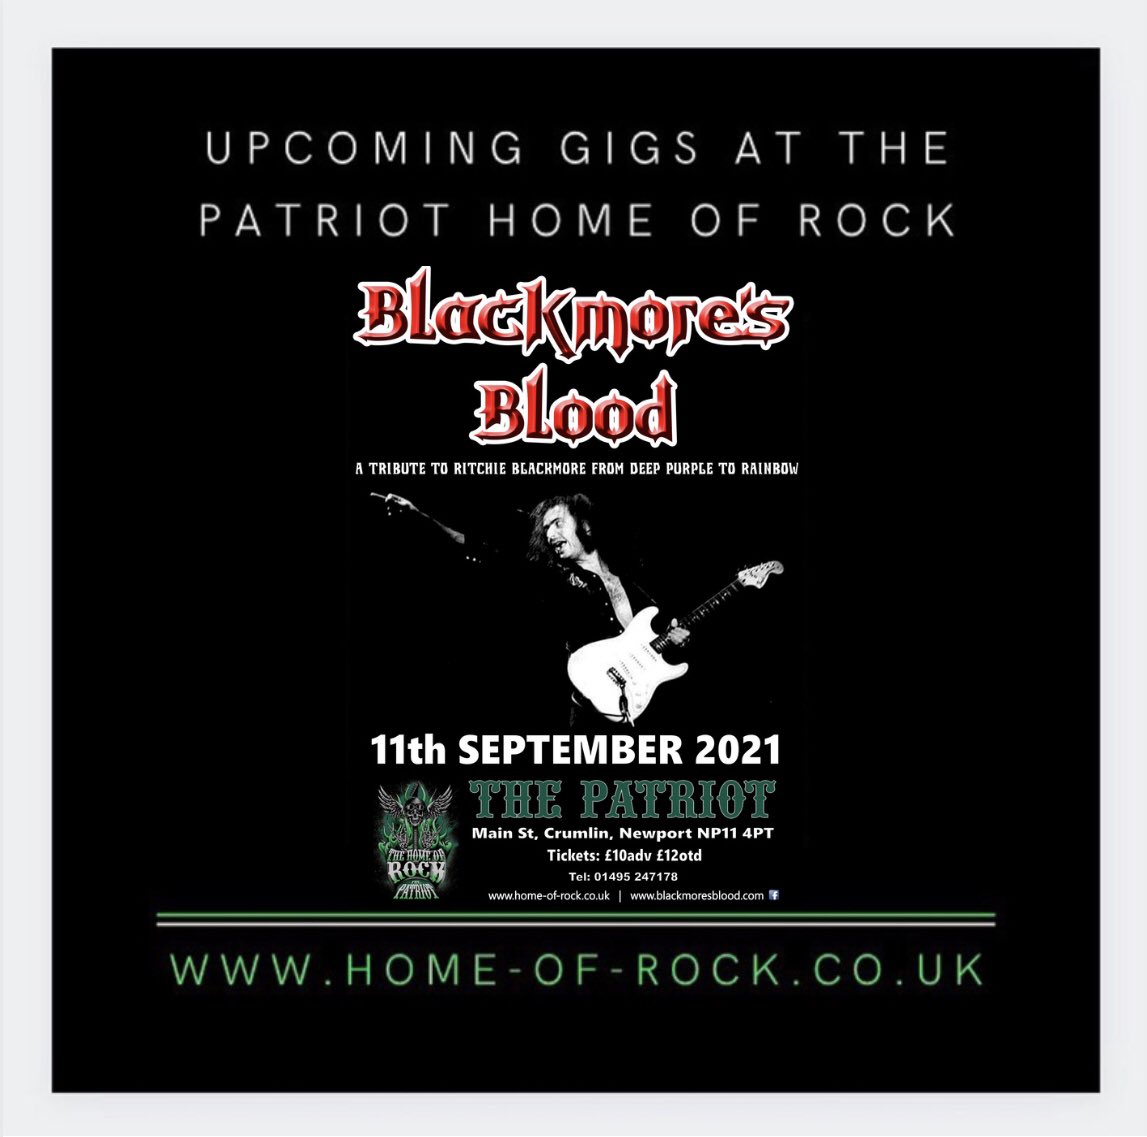 Catch #blackmoresblood in Sept at the new & improved @patriothomeofrock #patriothomeofrock - you can buy tickets via our website for our live upcoming #rockmusicgigs at the #patriot as well as other events. Follow on #Facebook #Instagram & #Twitter - home-of-rock.co.uk 🤟